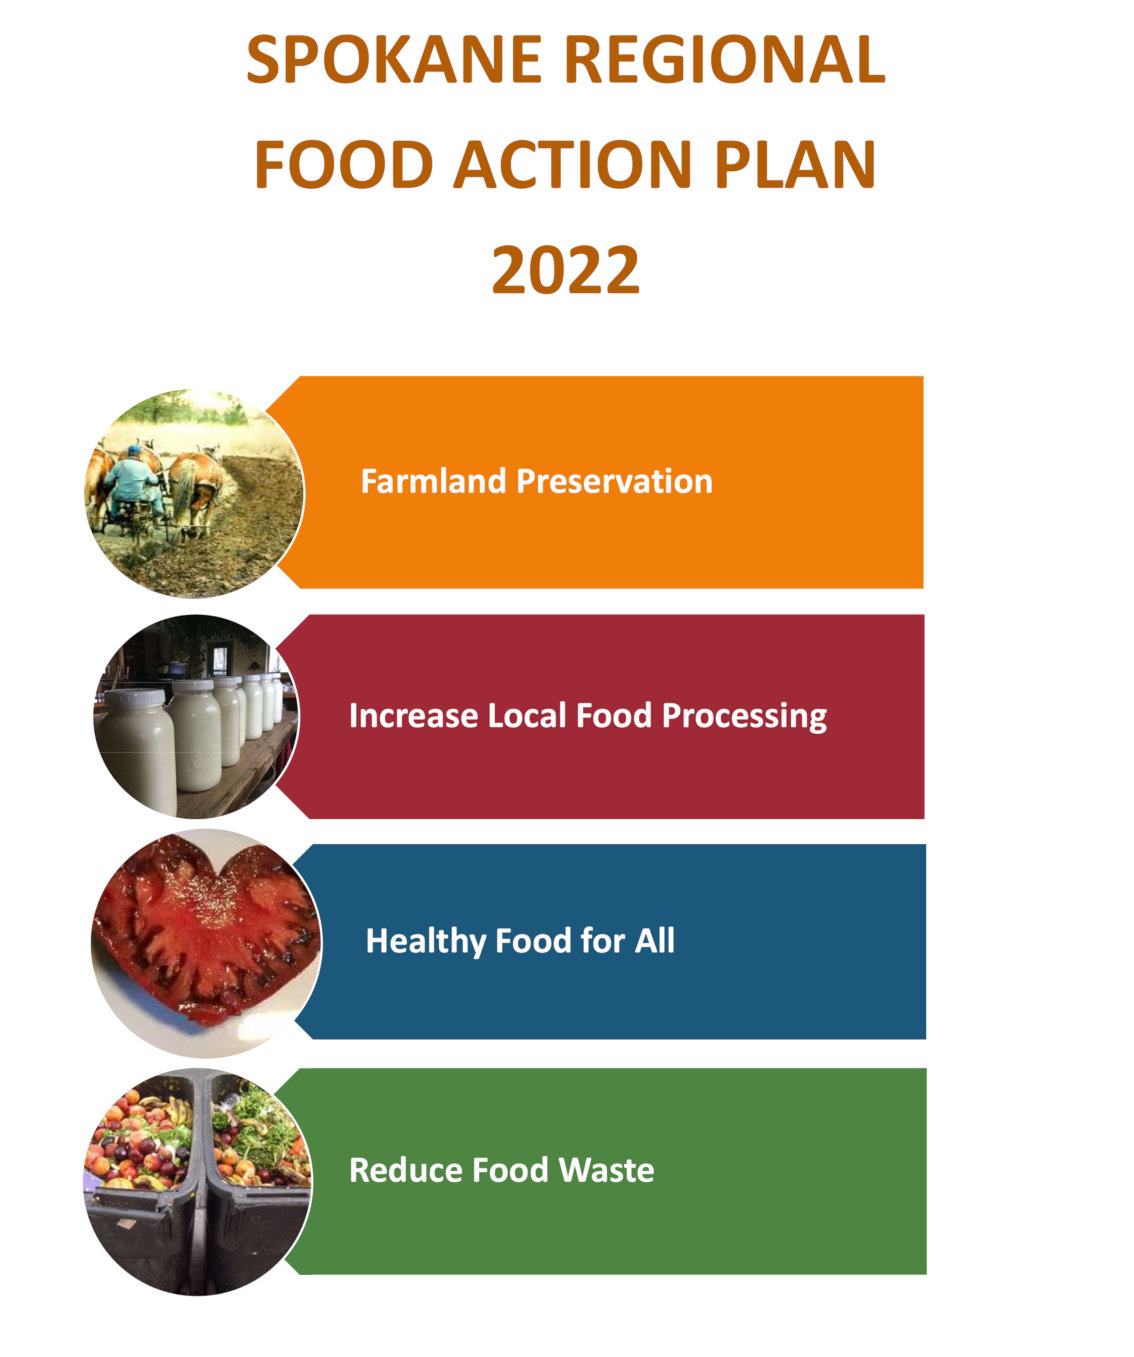 Cover of the Spokane Regional Food Action Plan by the Spokane Food Policy Council